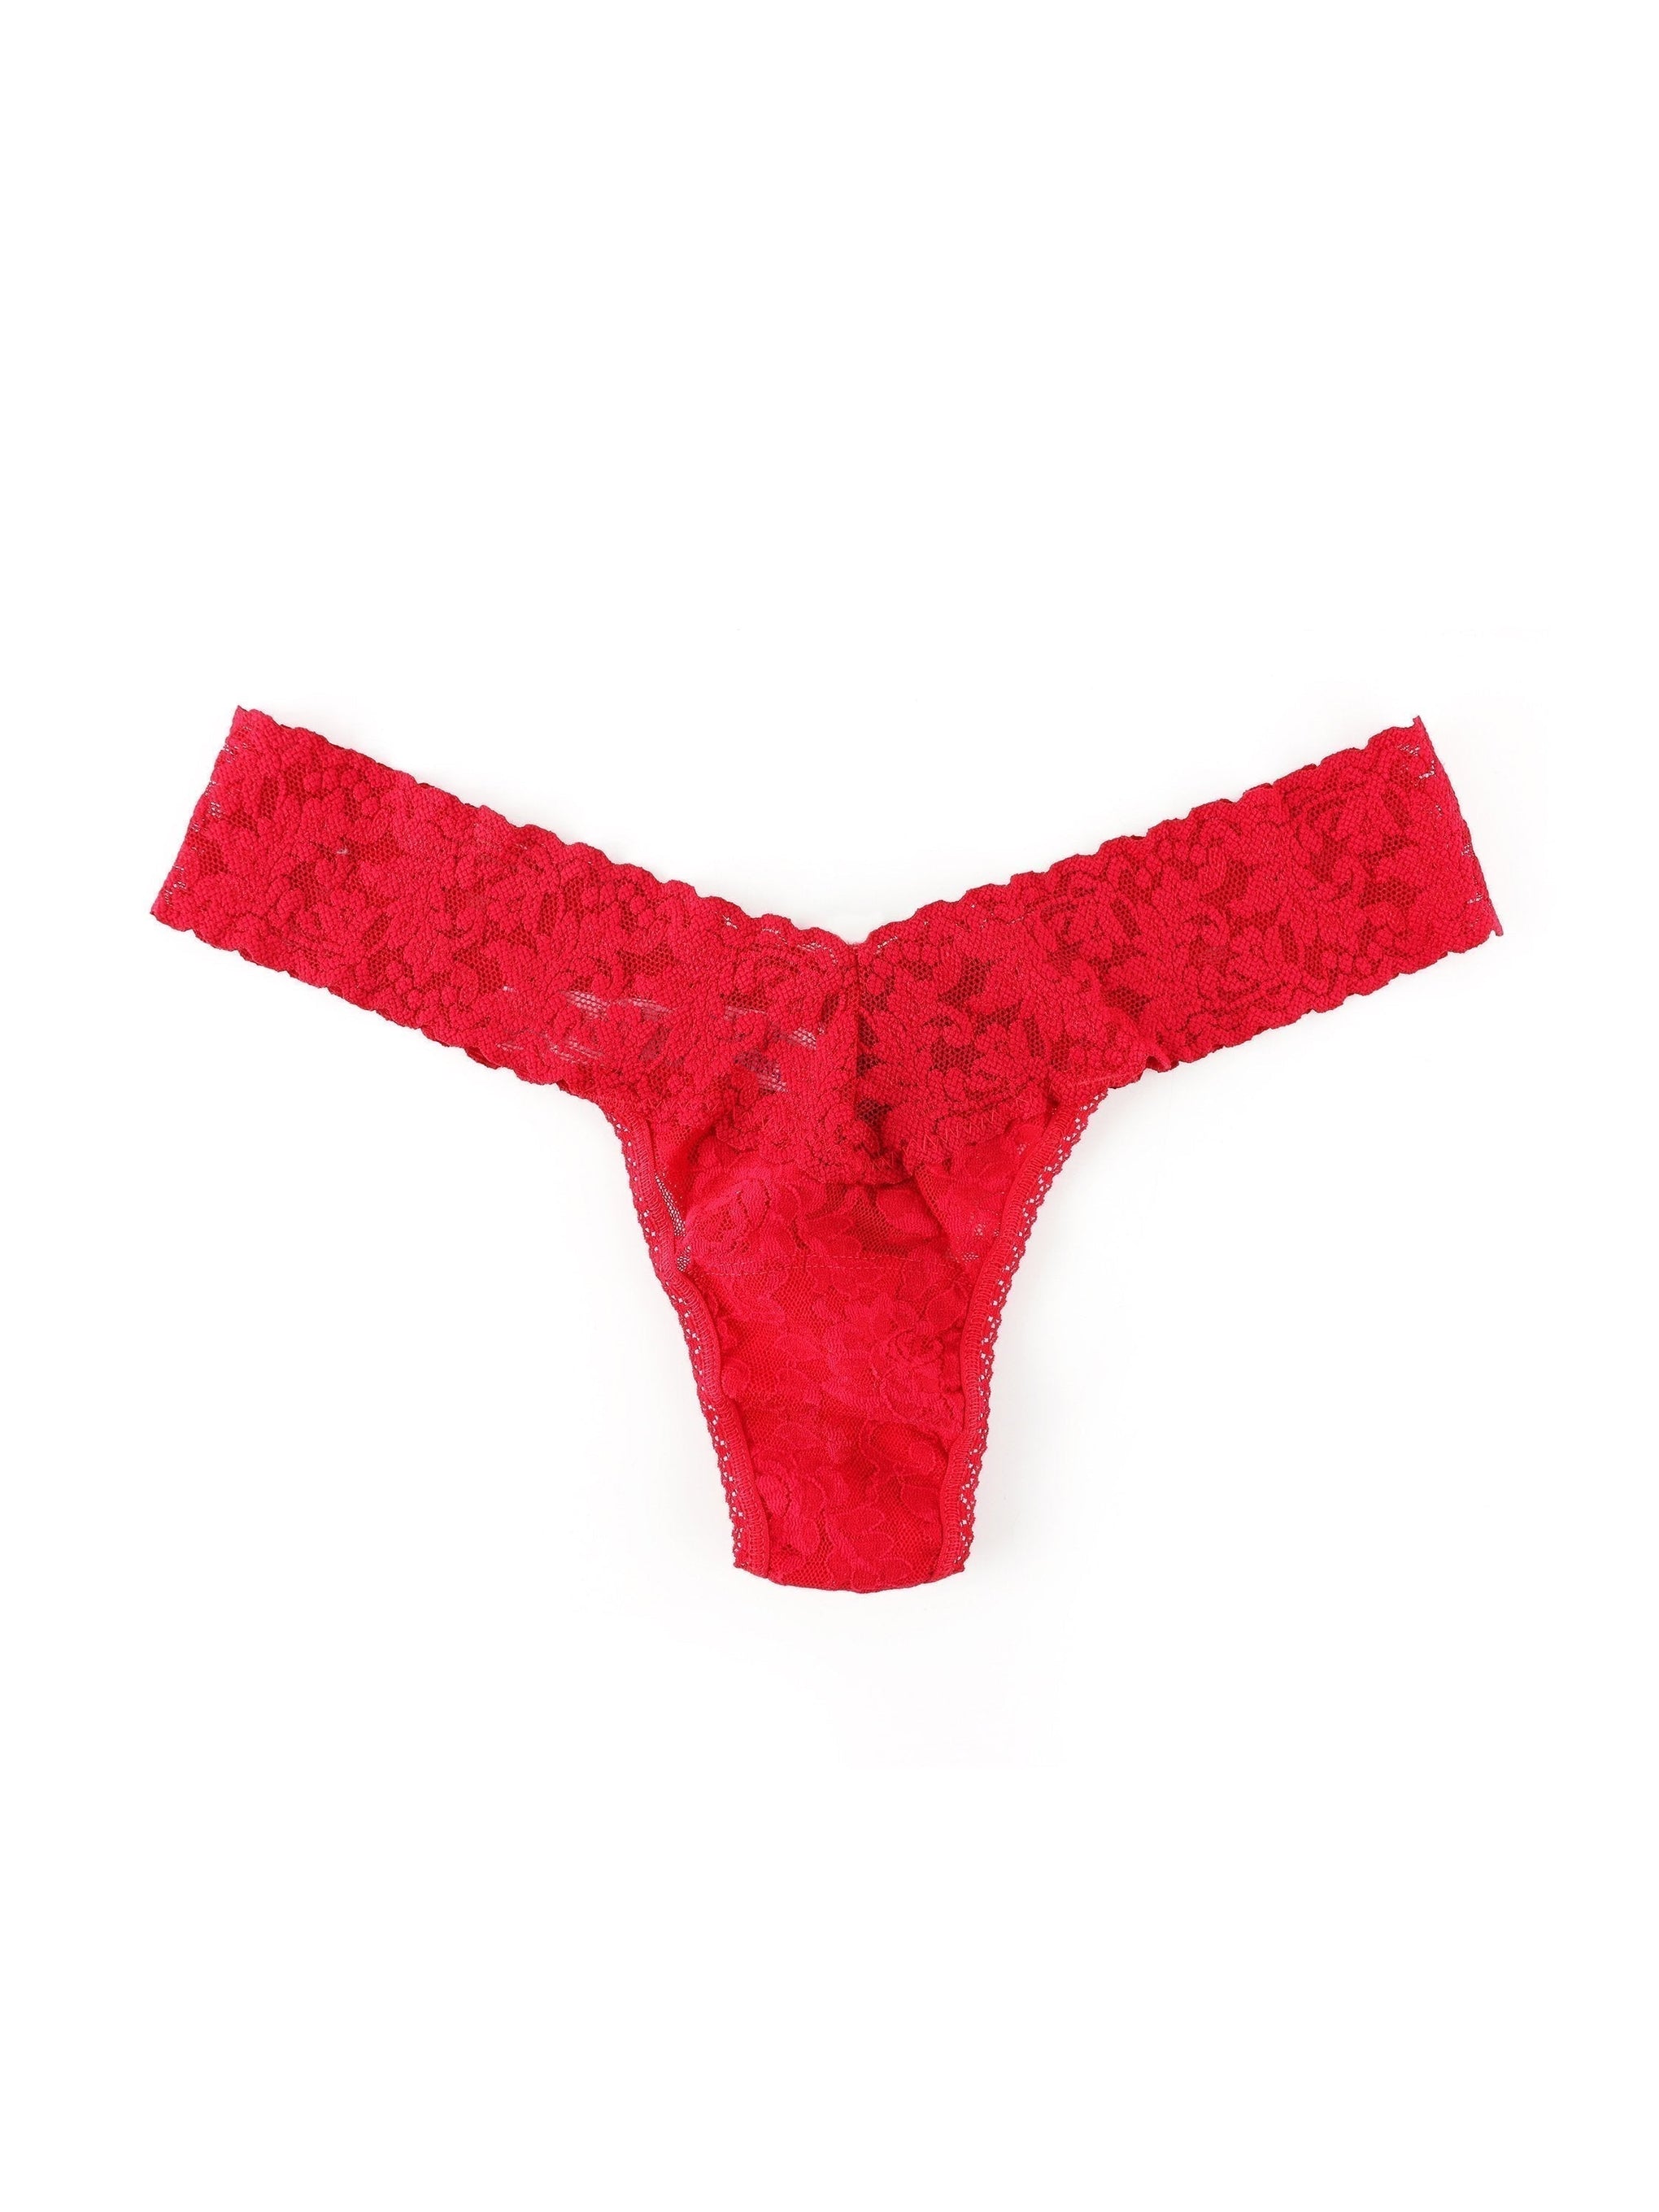 Hanky Panky Daily Lace Low Rise Thong (Lipstick Red) Women's